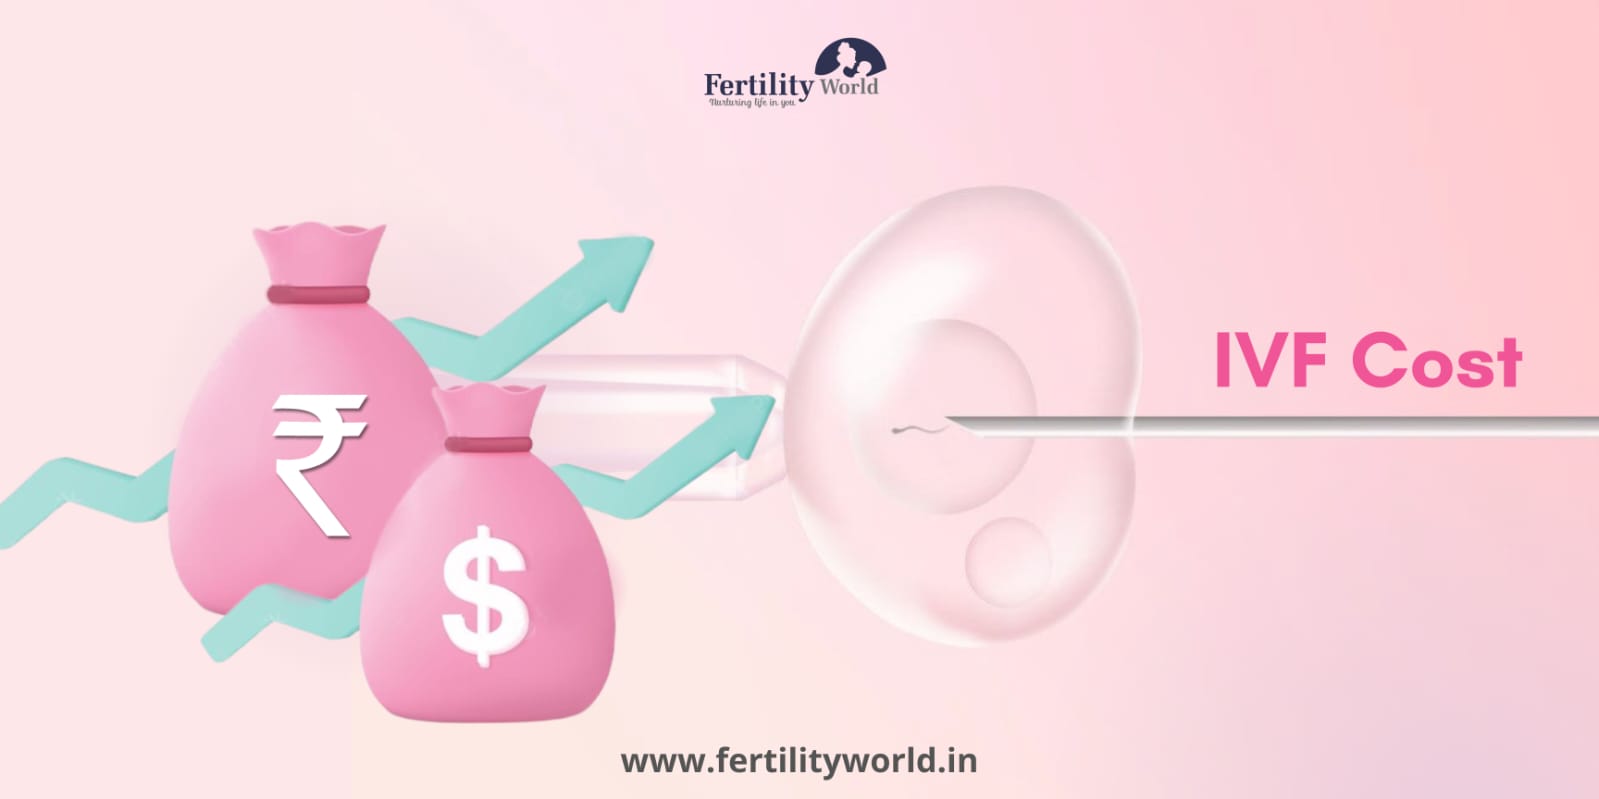 How do you pay the IVF cost at the fertilityworld?